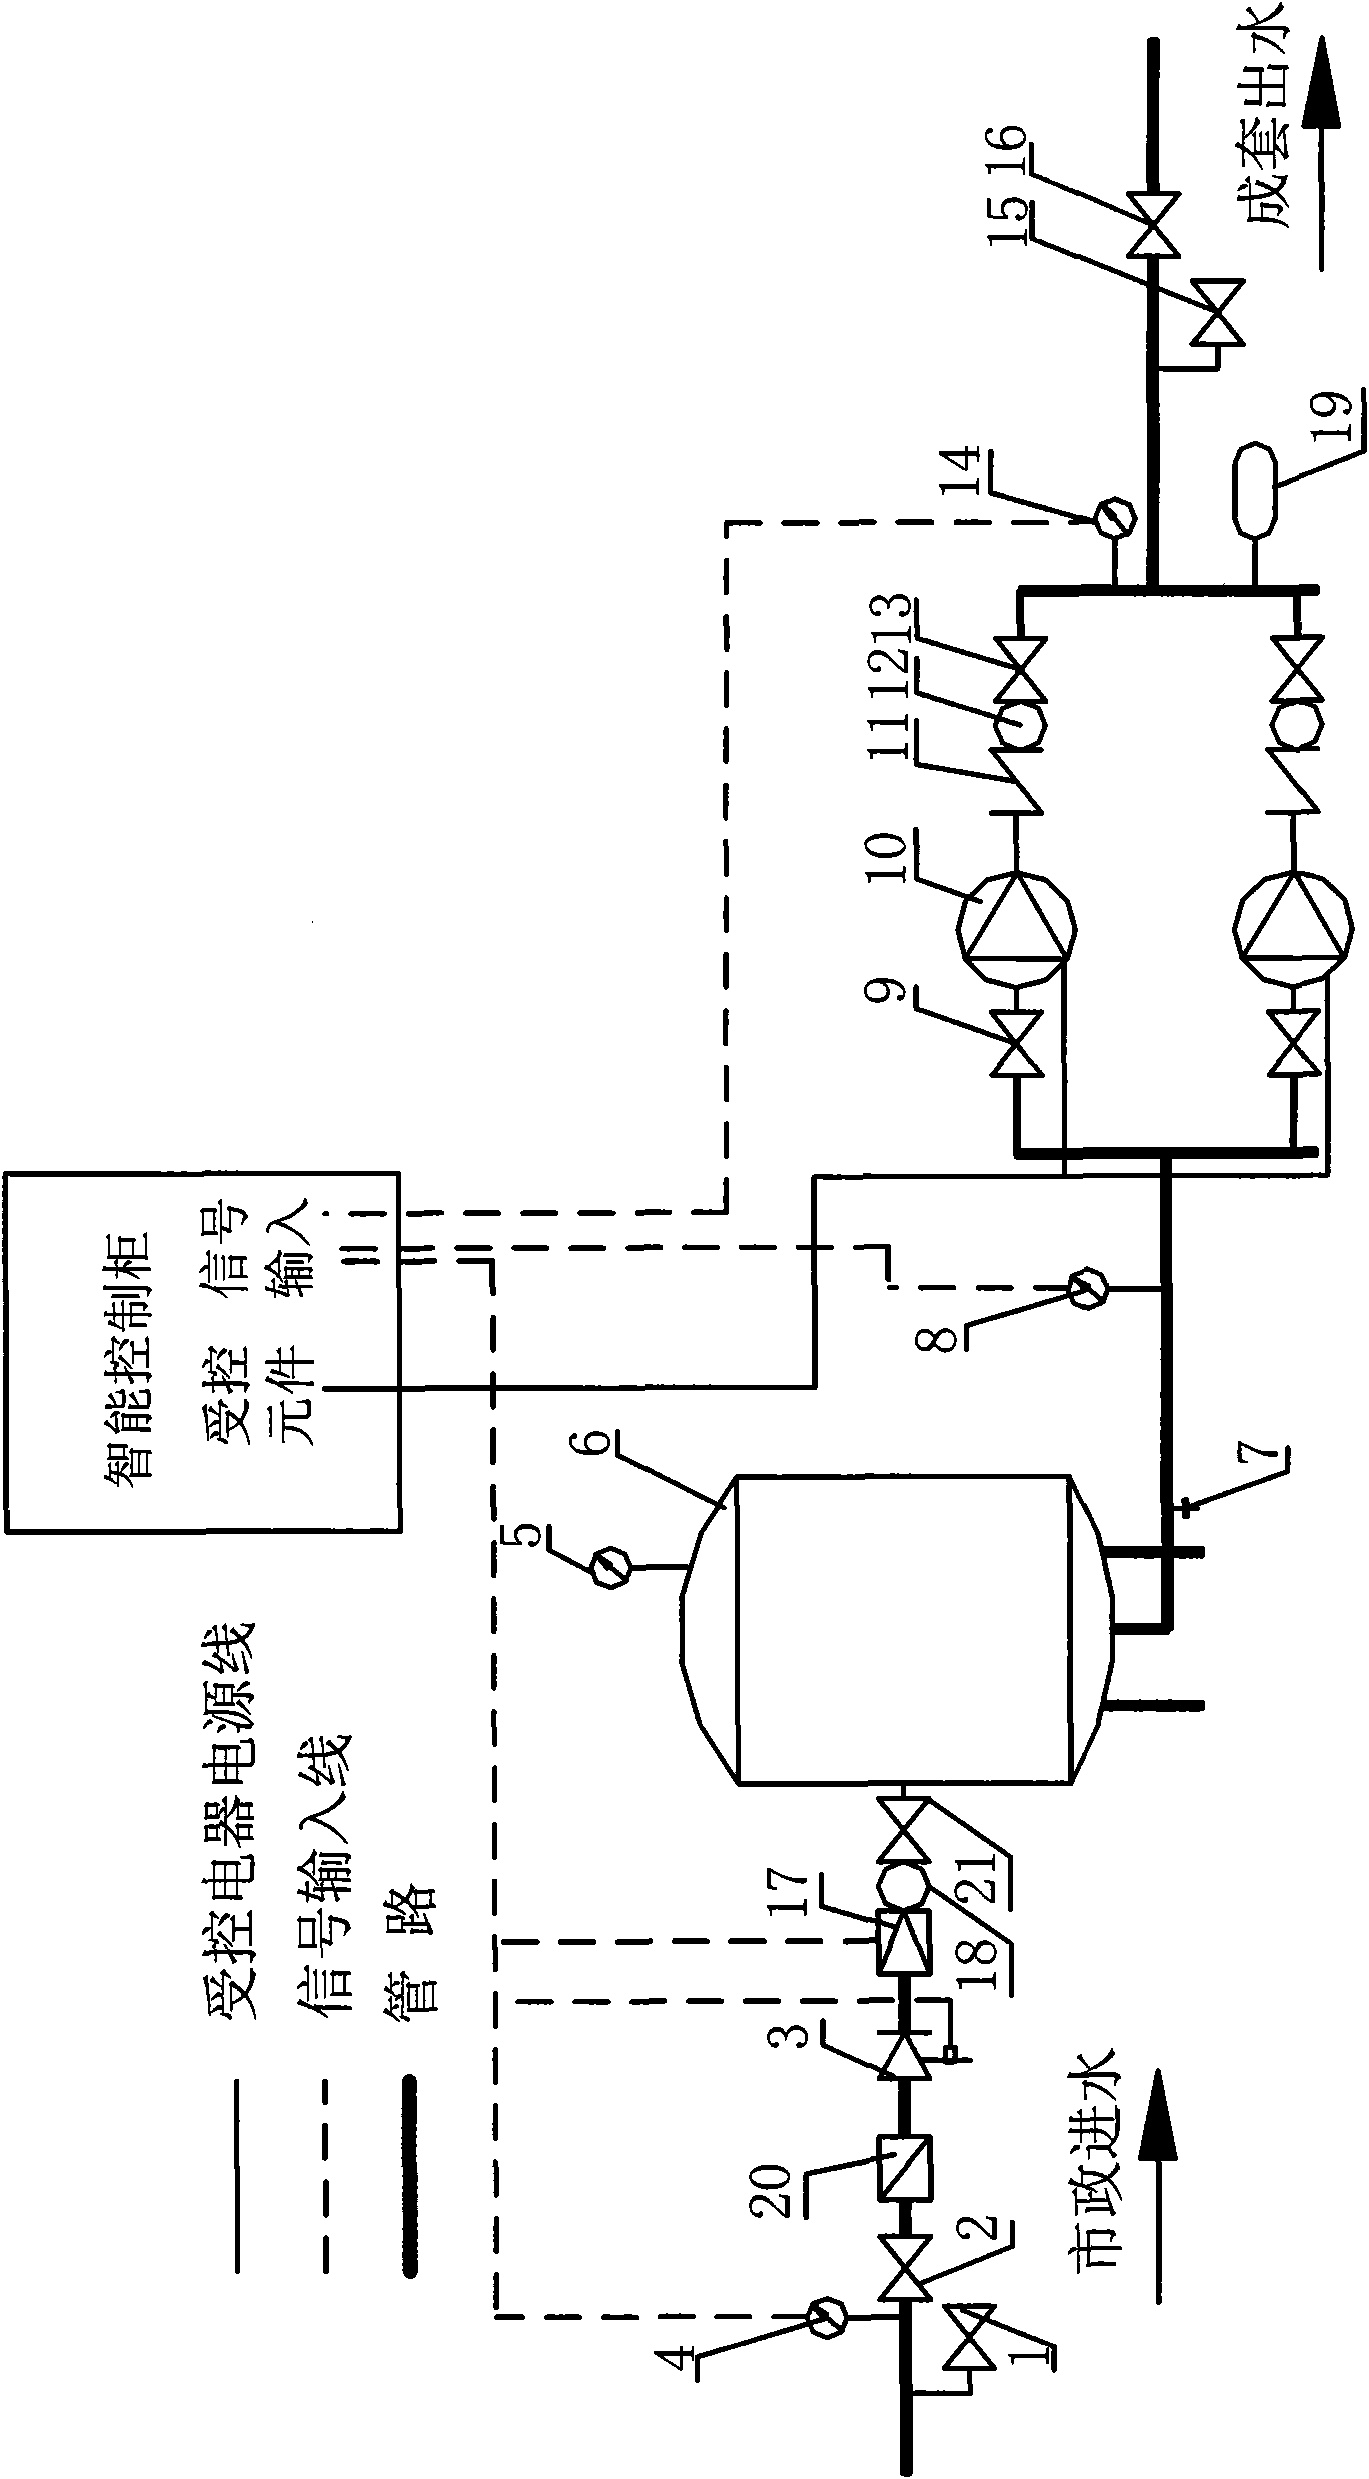 Direct-connected non-negative pressure water supply equipment